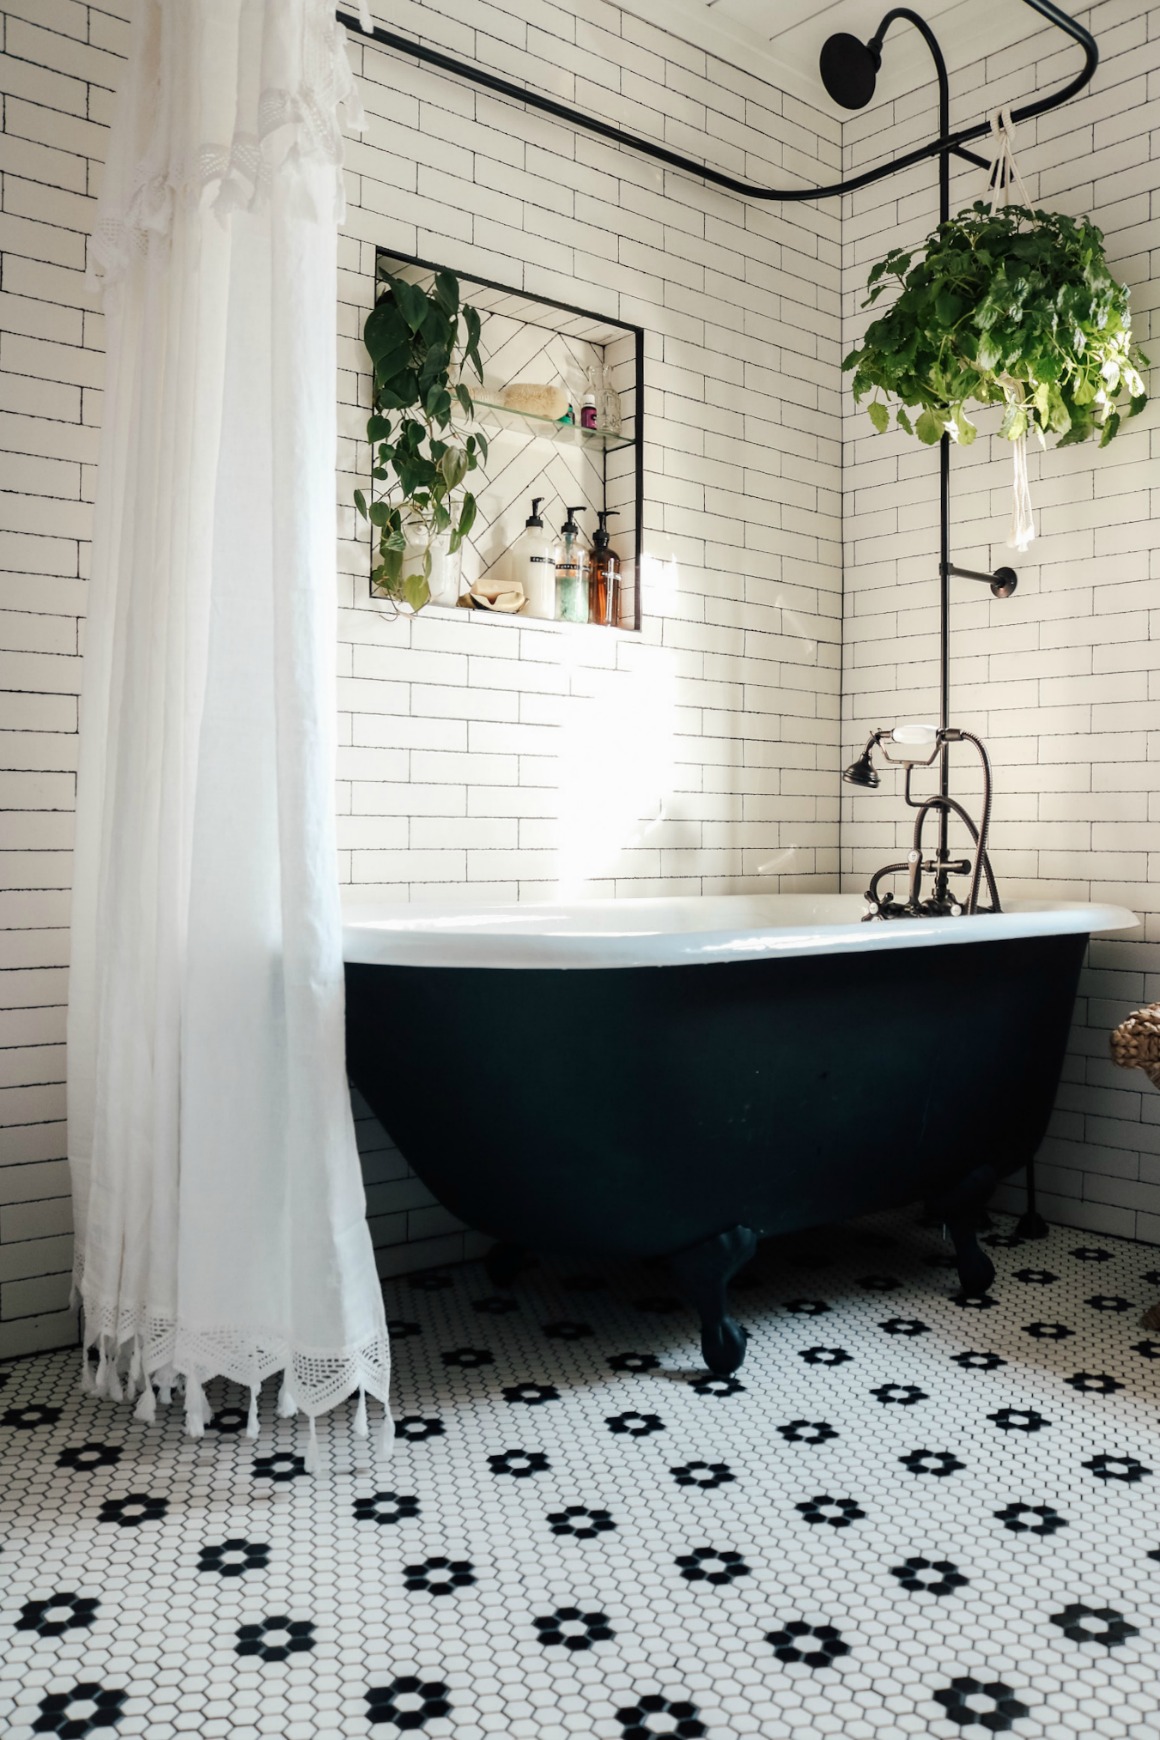 Master Bathroom Reveal With Claw Foot, Clawfoot Bathtub And Shower